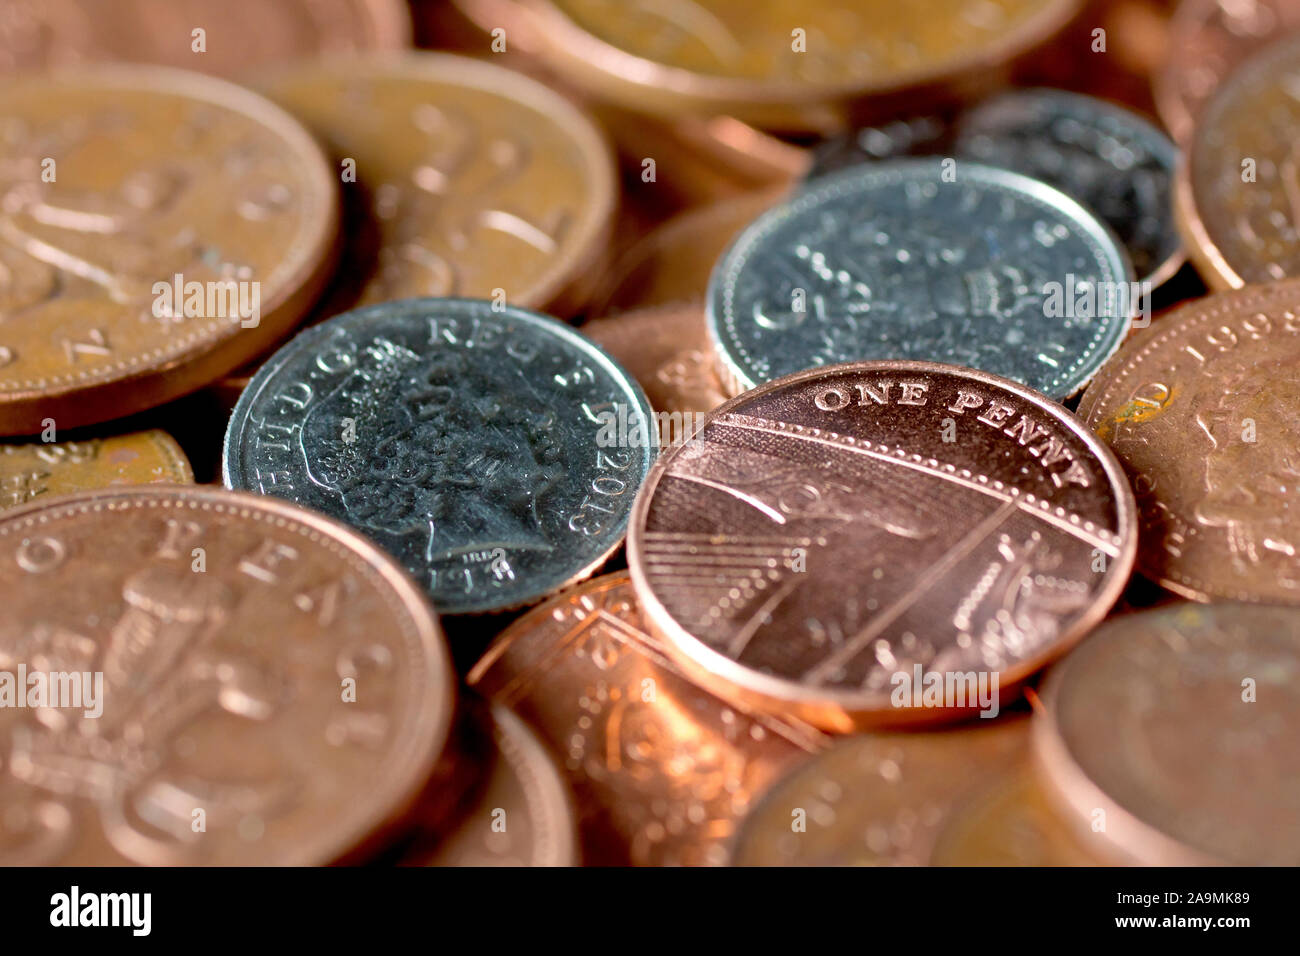 A selection of the lowest denomination coins in circulation in the UK, focusing on a single penny with low depth of field. Stock Photo